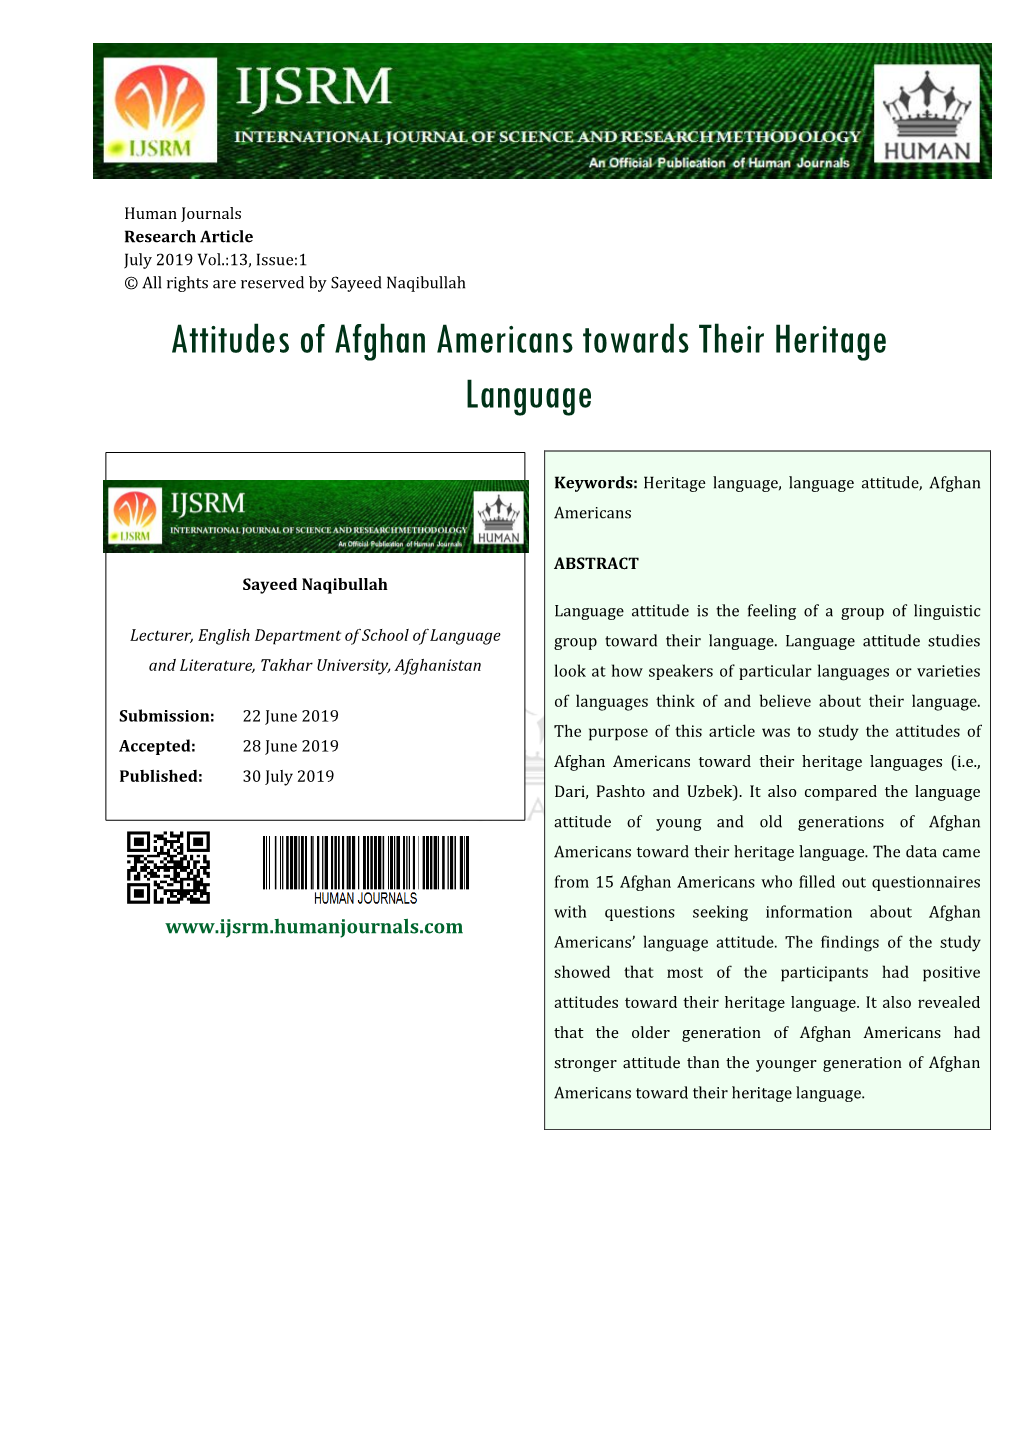 Attitudes of Afghan Americans Towards Their Heritage Language